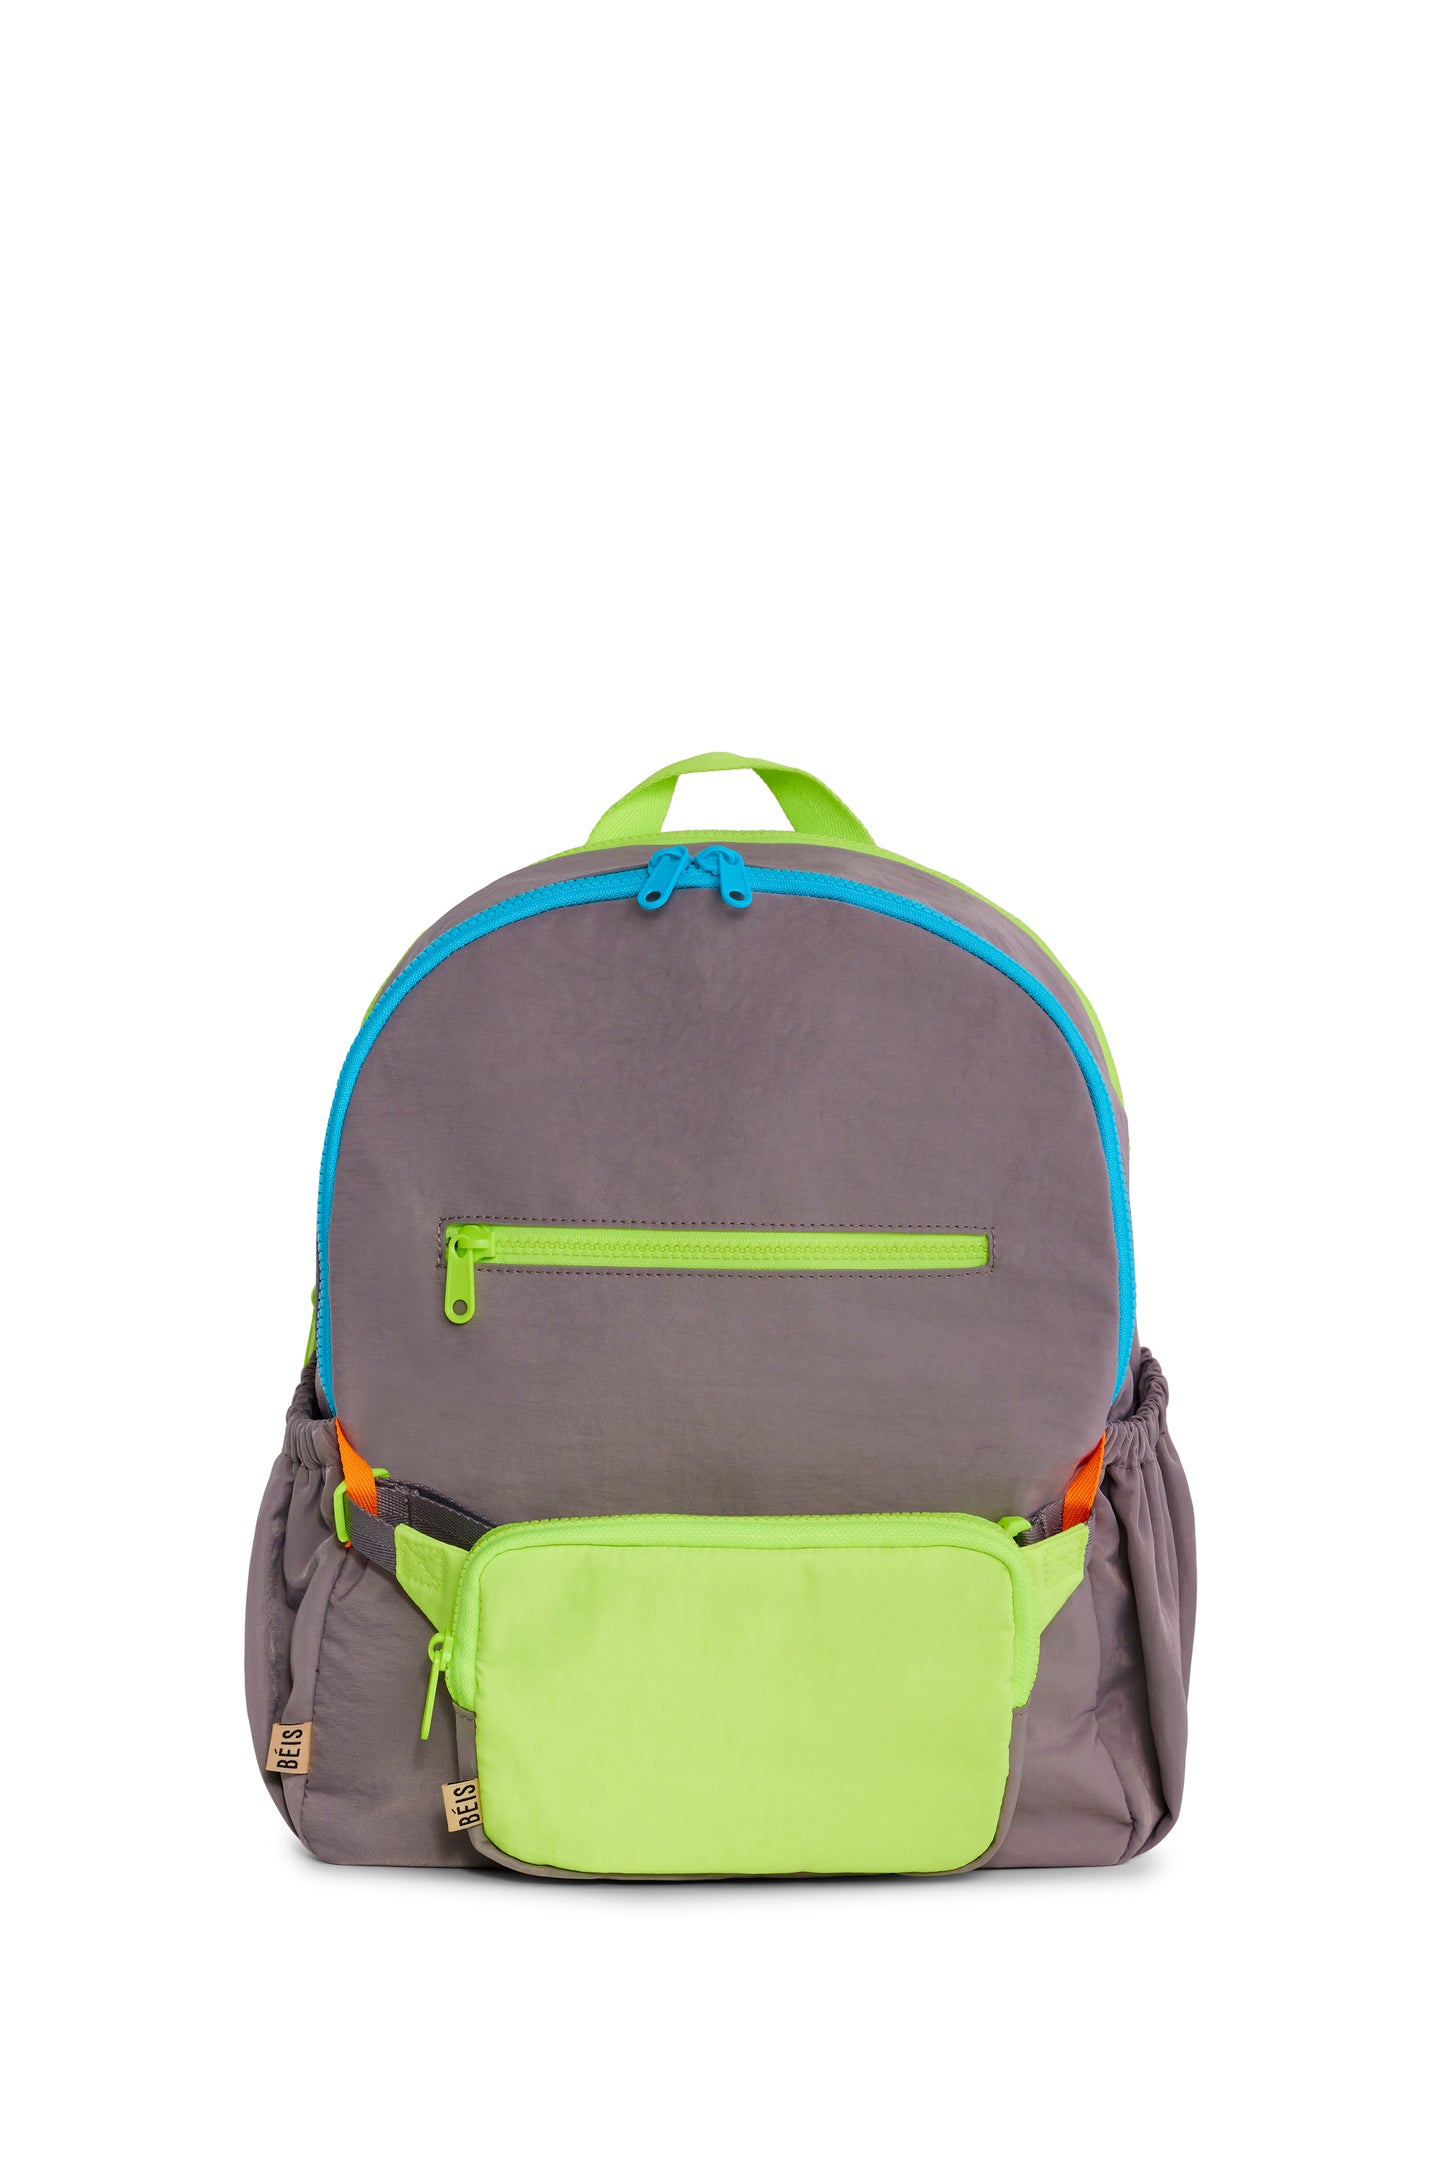 Laundry Backpack, Cool Grey, Sold by at Home